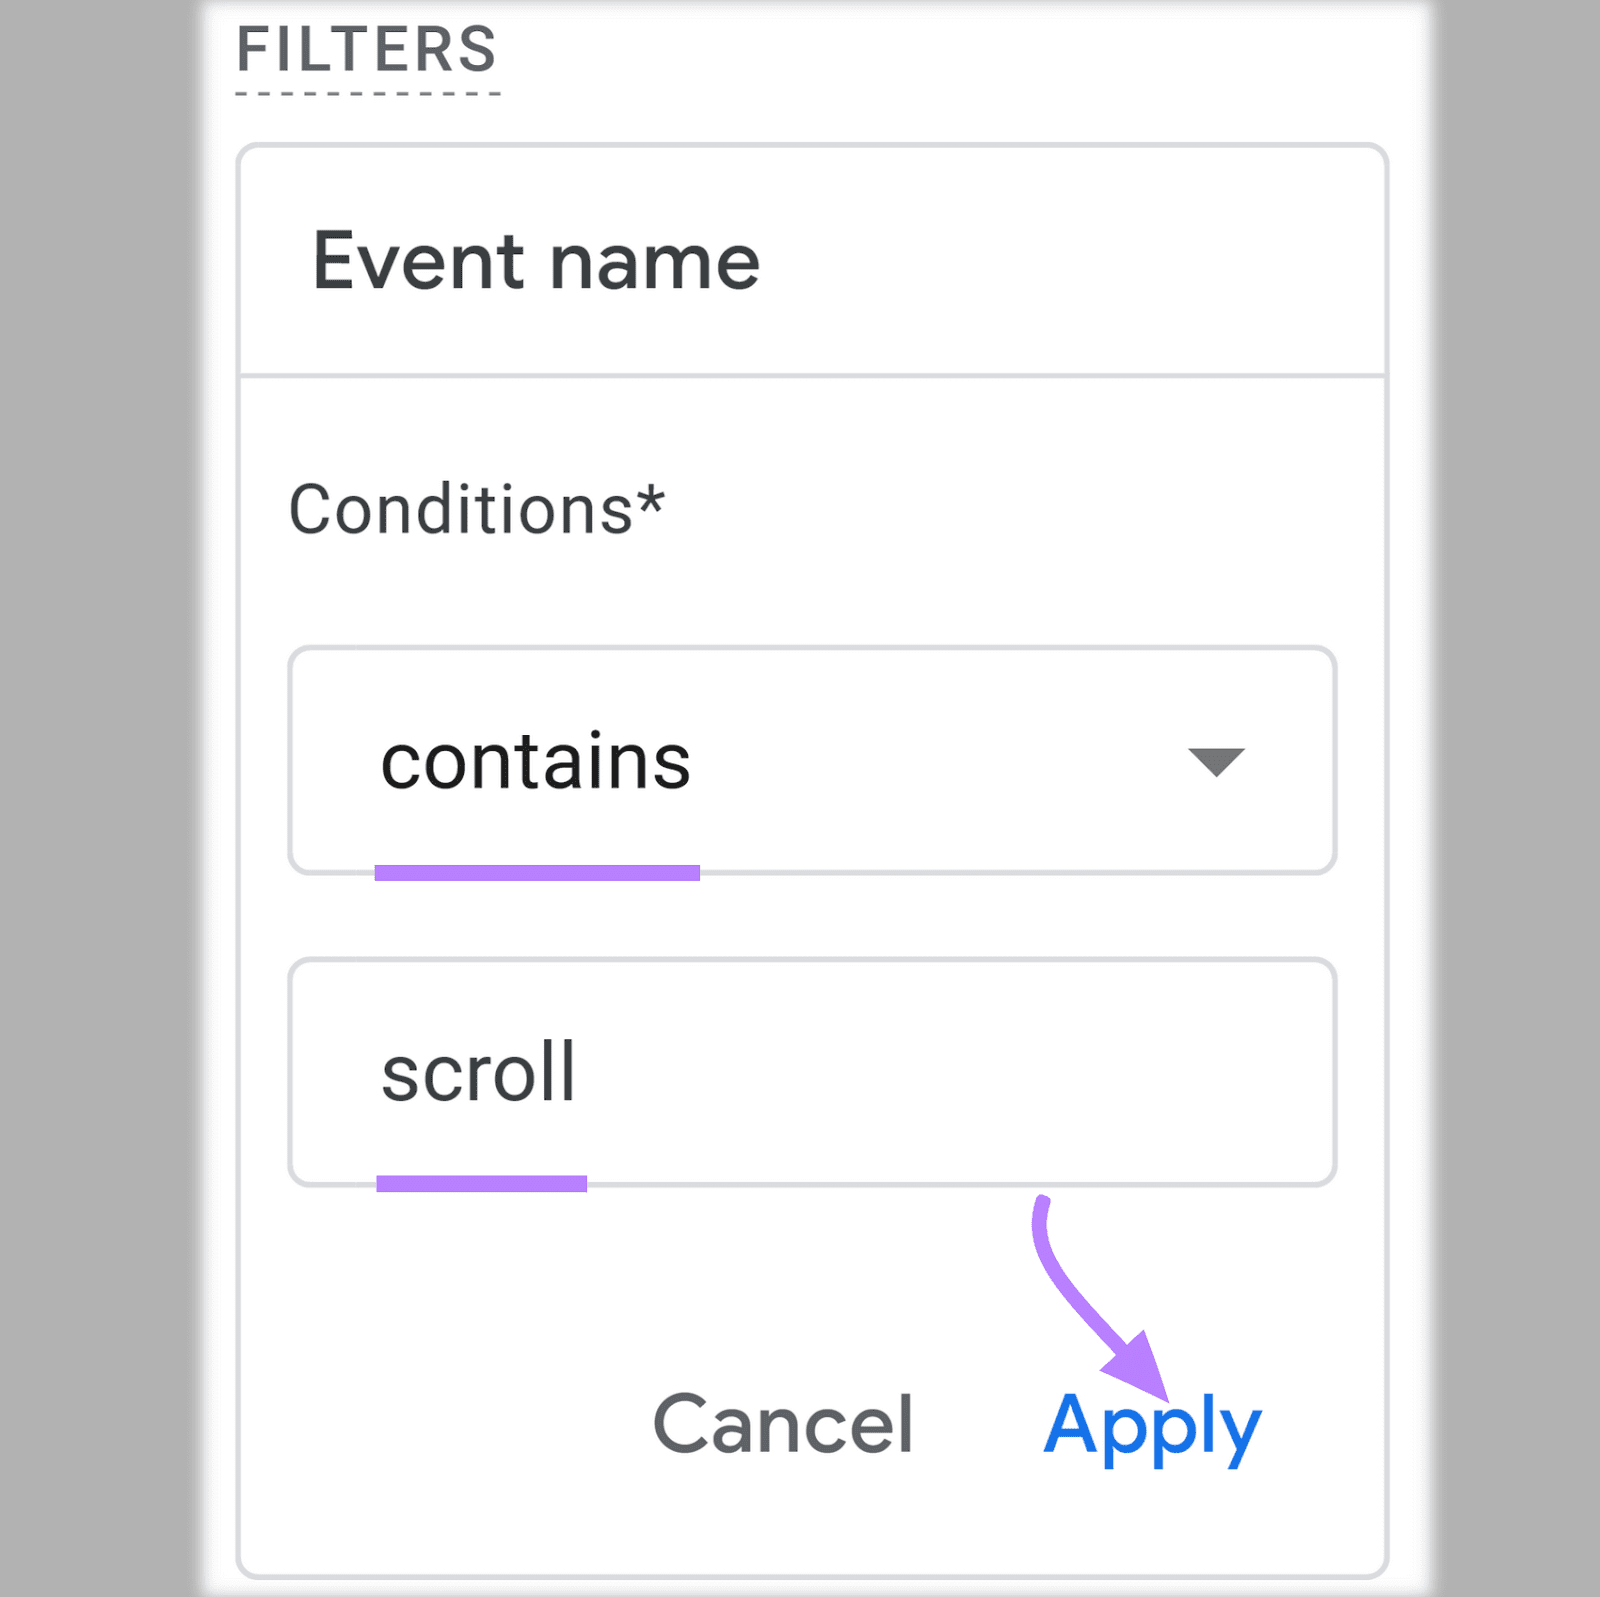 Conditions "contains" "scroll" fields selected under match types